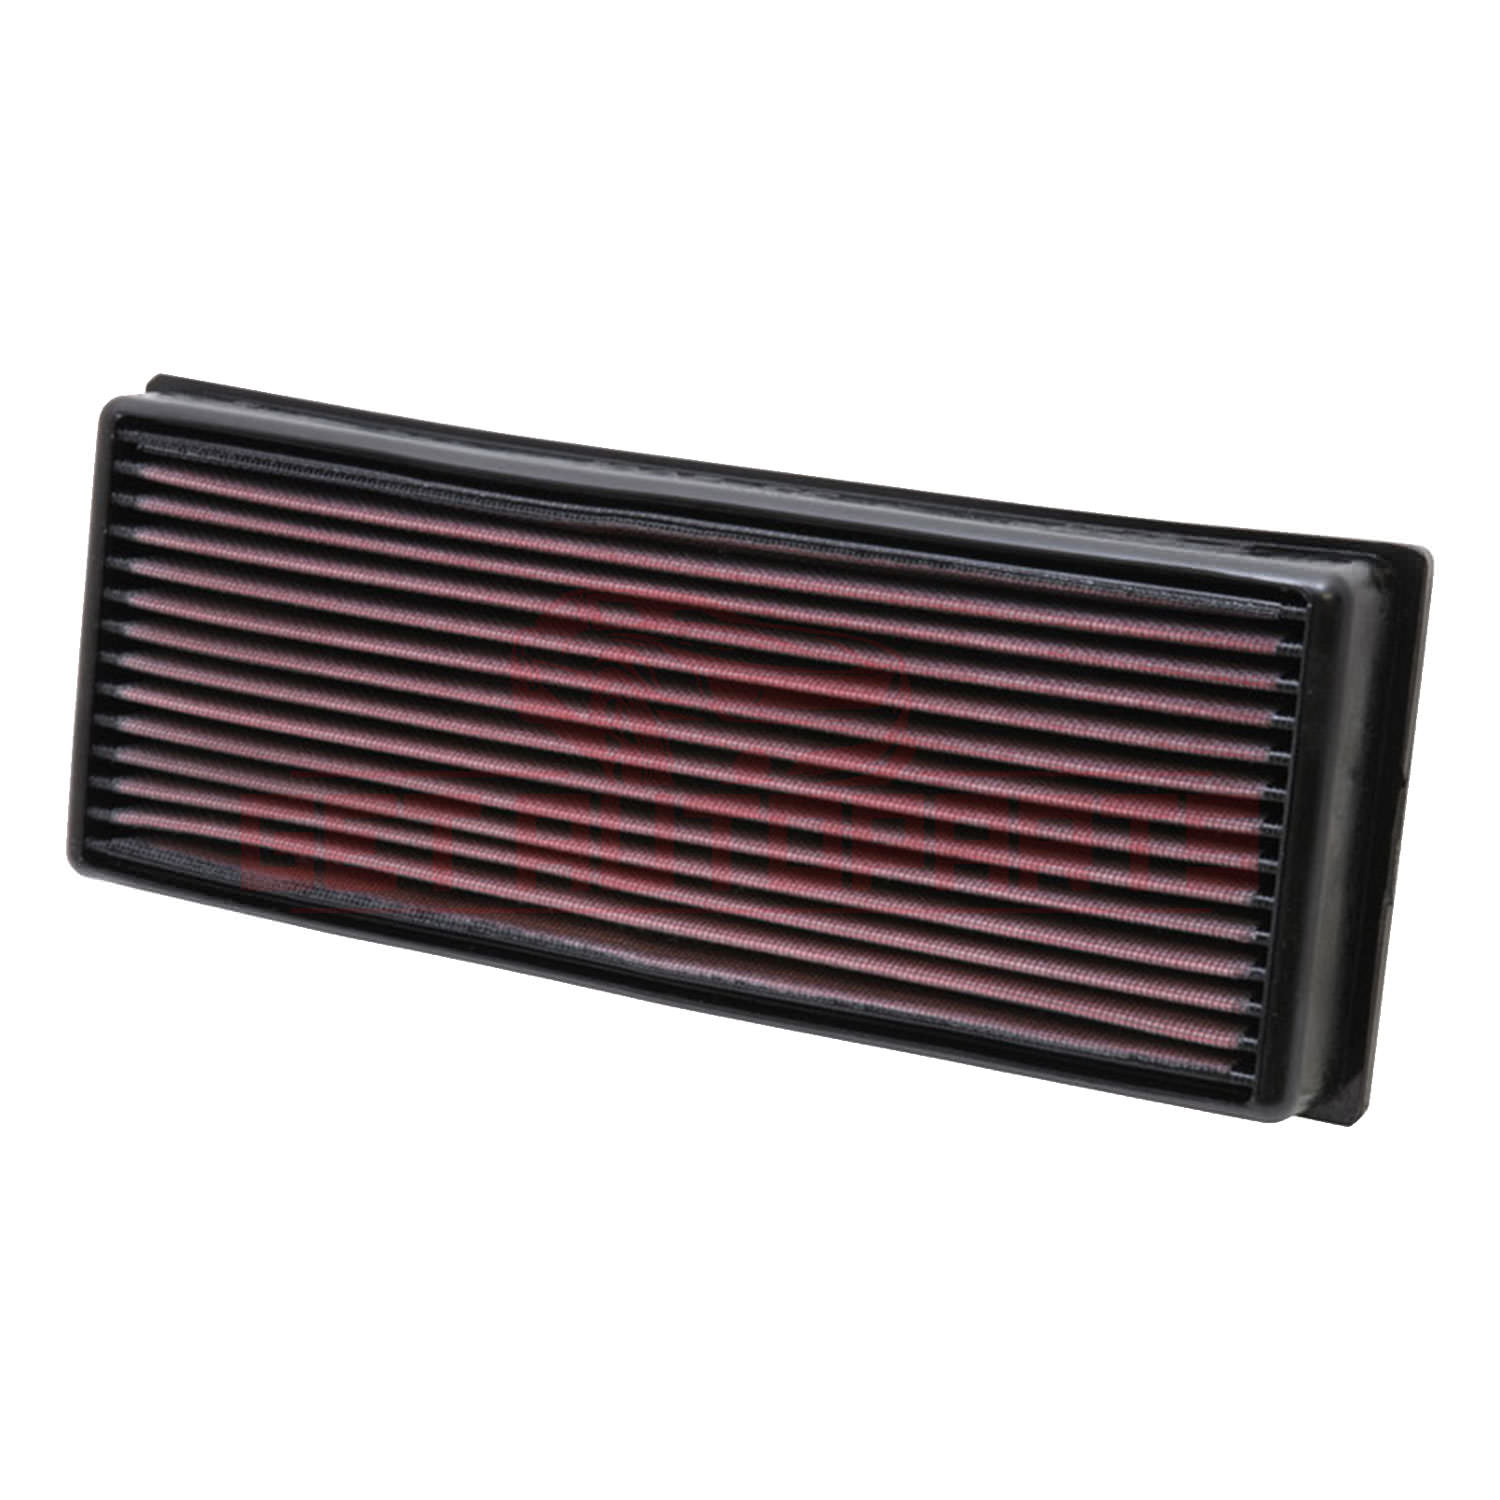 K&N Replacement Air Filter for Audi 90 Quattro 1988-1991